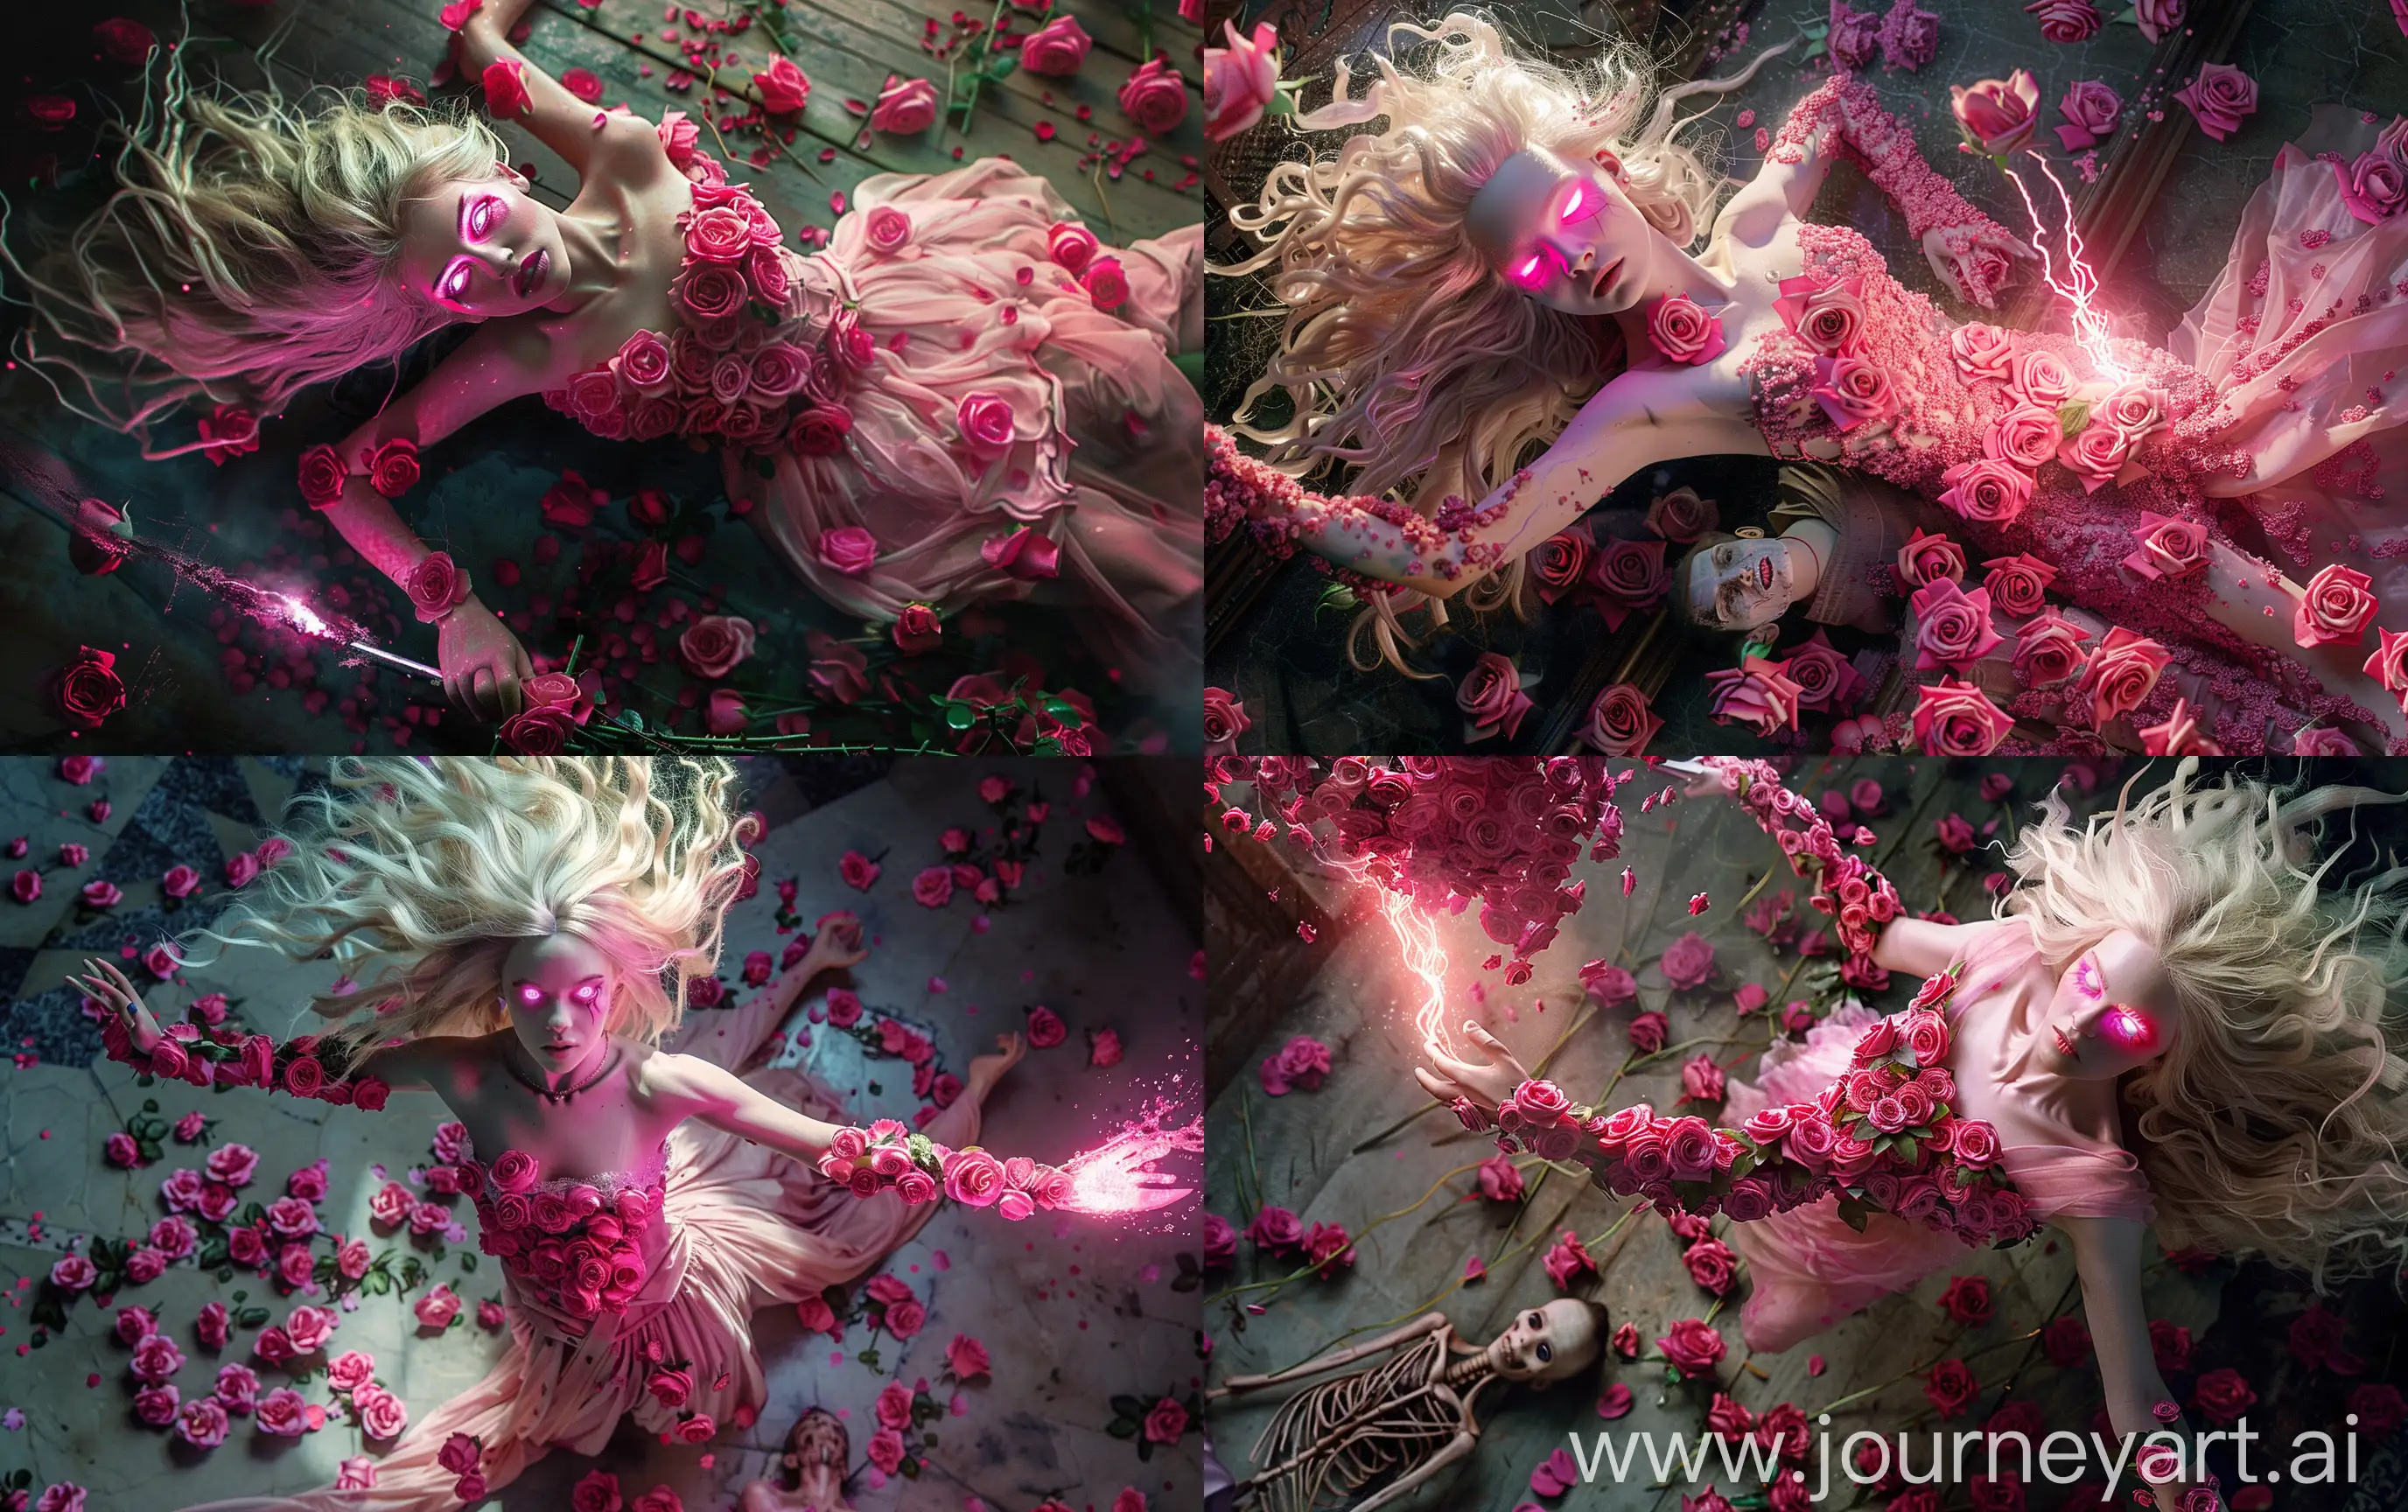 Mystical-Pink-Rose-Goddess-Descends-with-Glowing-Dagger-Amidst-Roses